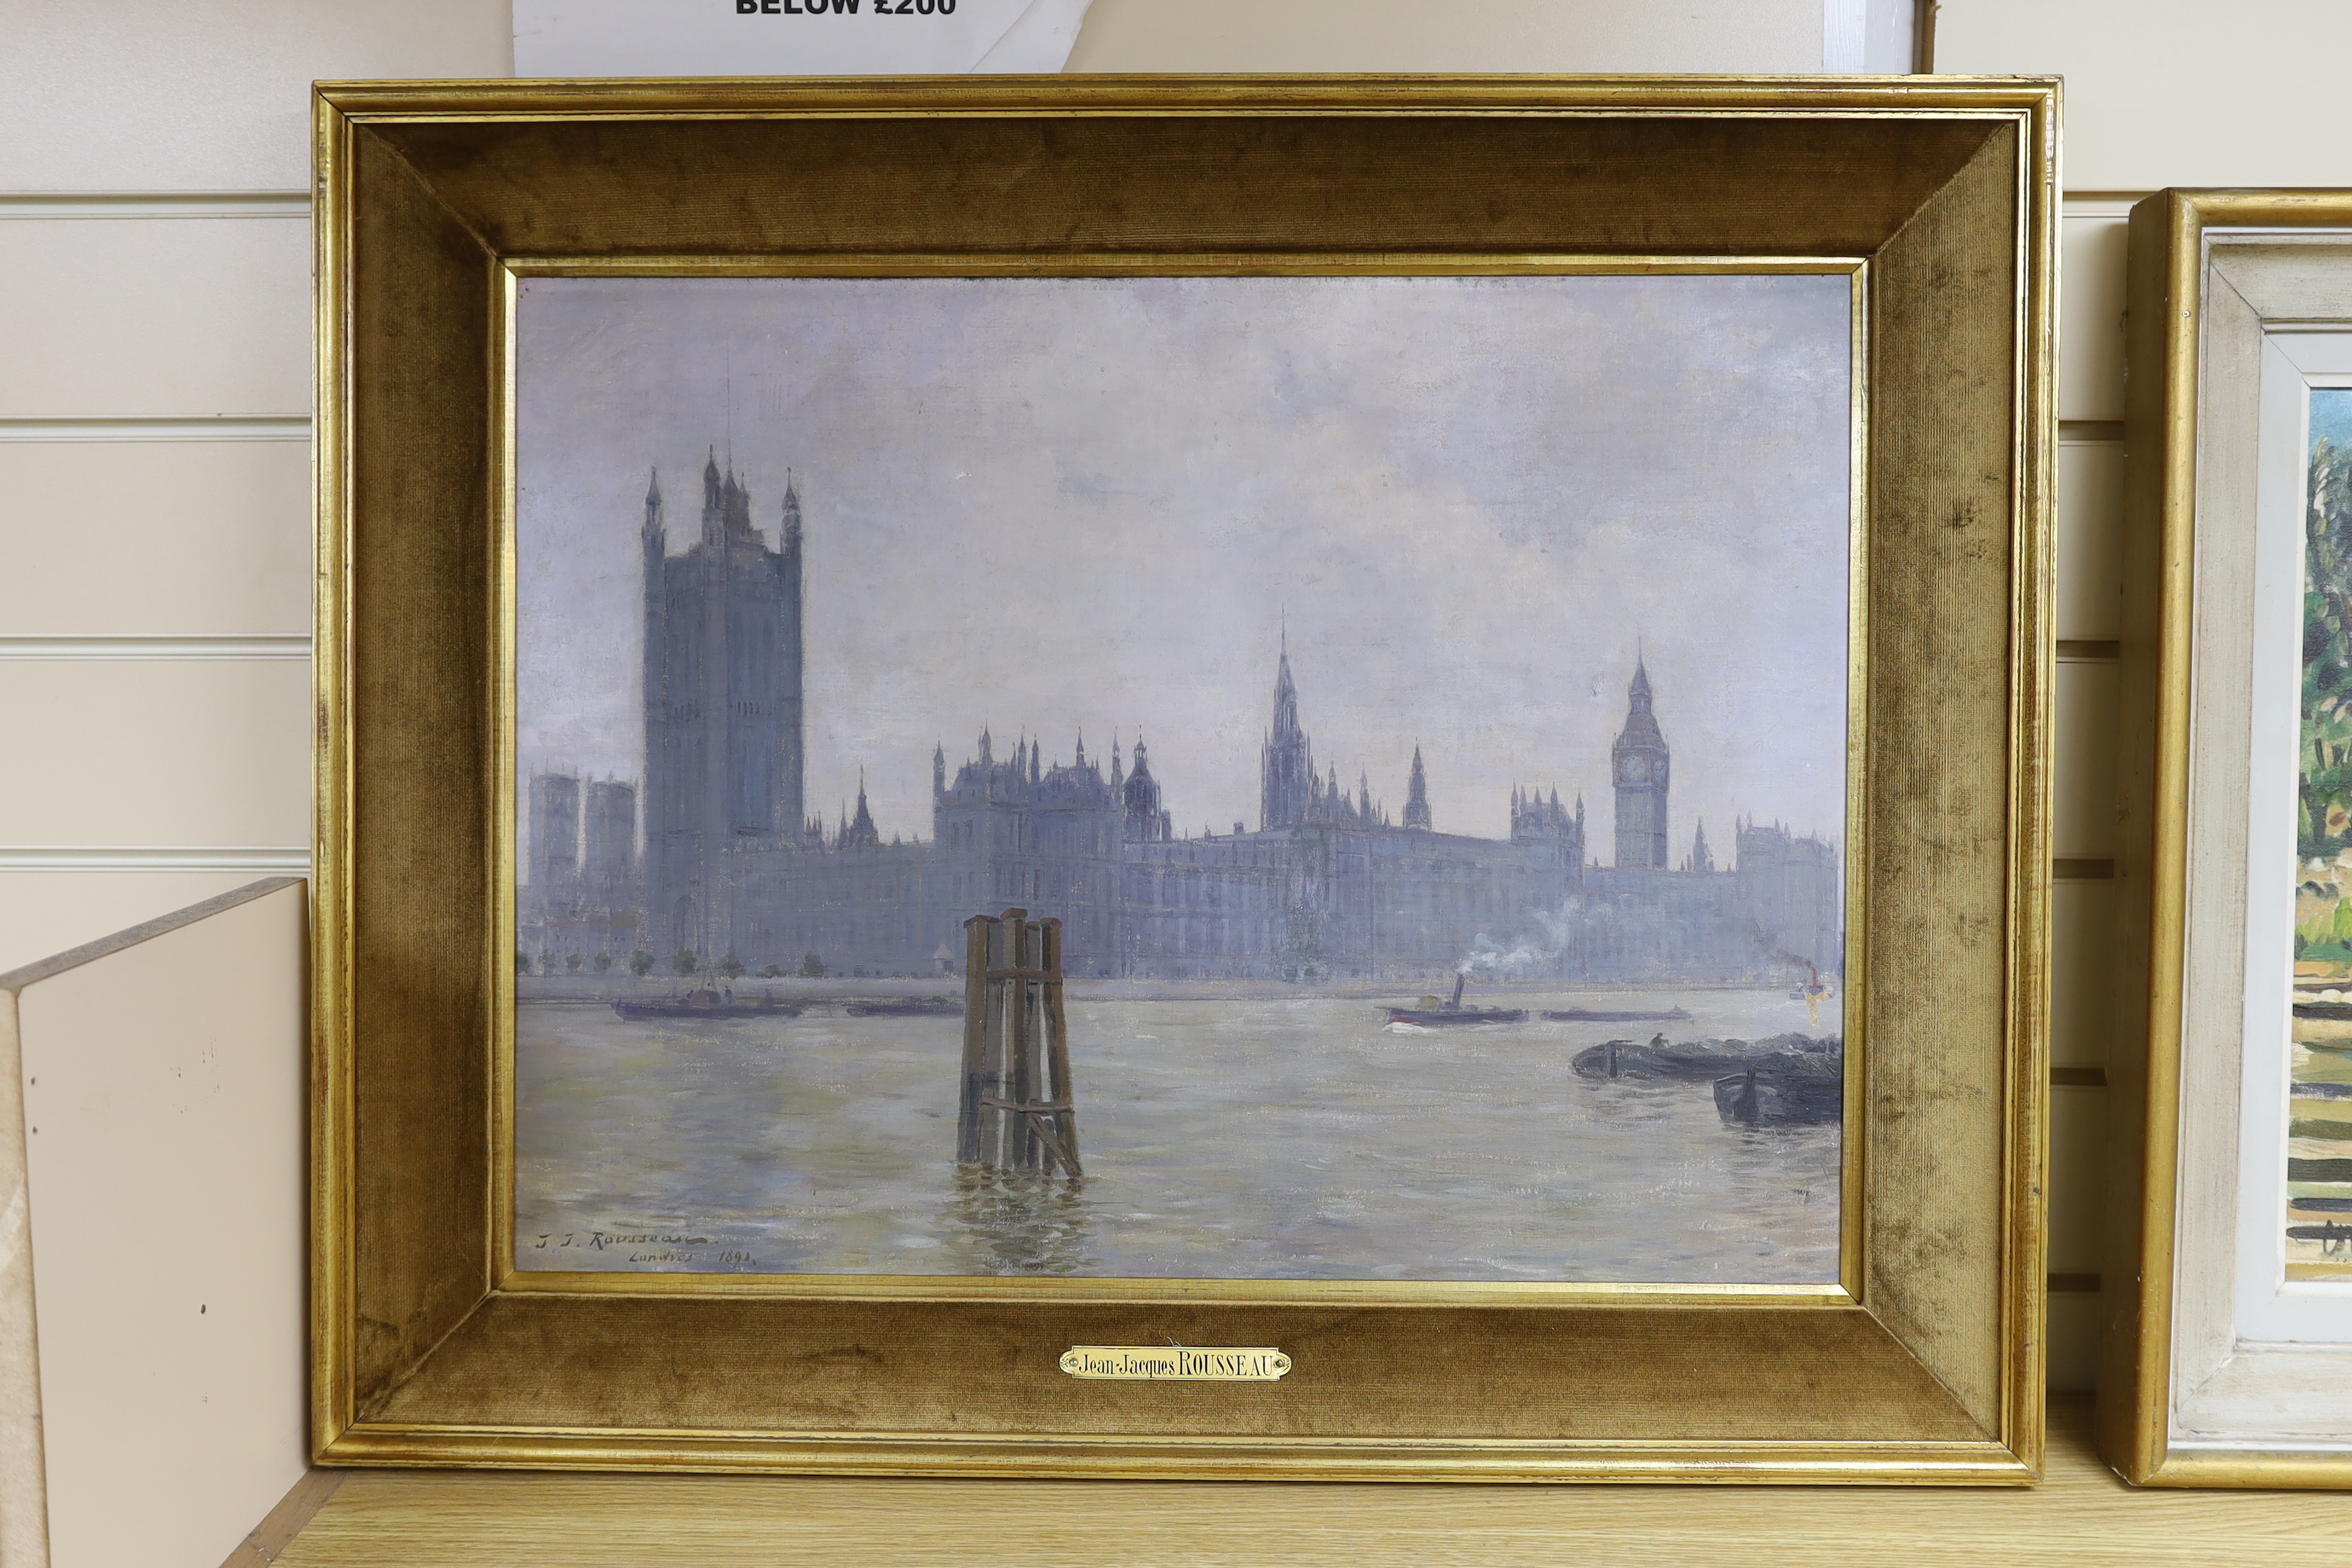 Jean-Jacques Rousseau (French, 1861-1911), oil on canvas, ‘Londres 1891’, The Houses of Parliament from The Thames, signed and dated lower left 1891, 44 x 59cm, applied plaque to the frame